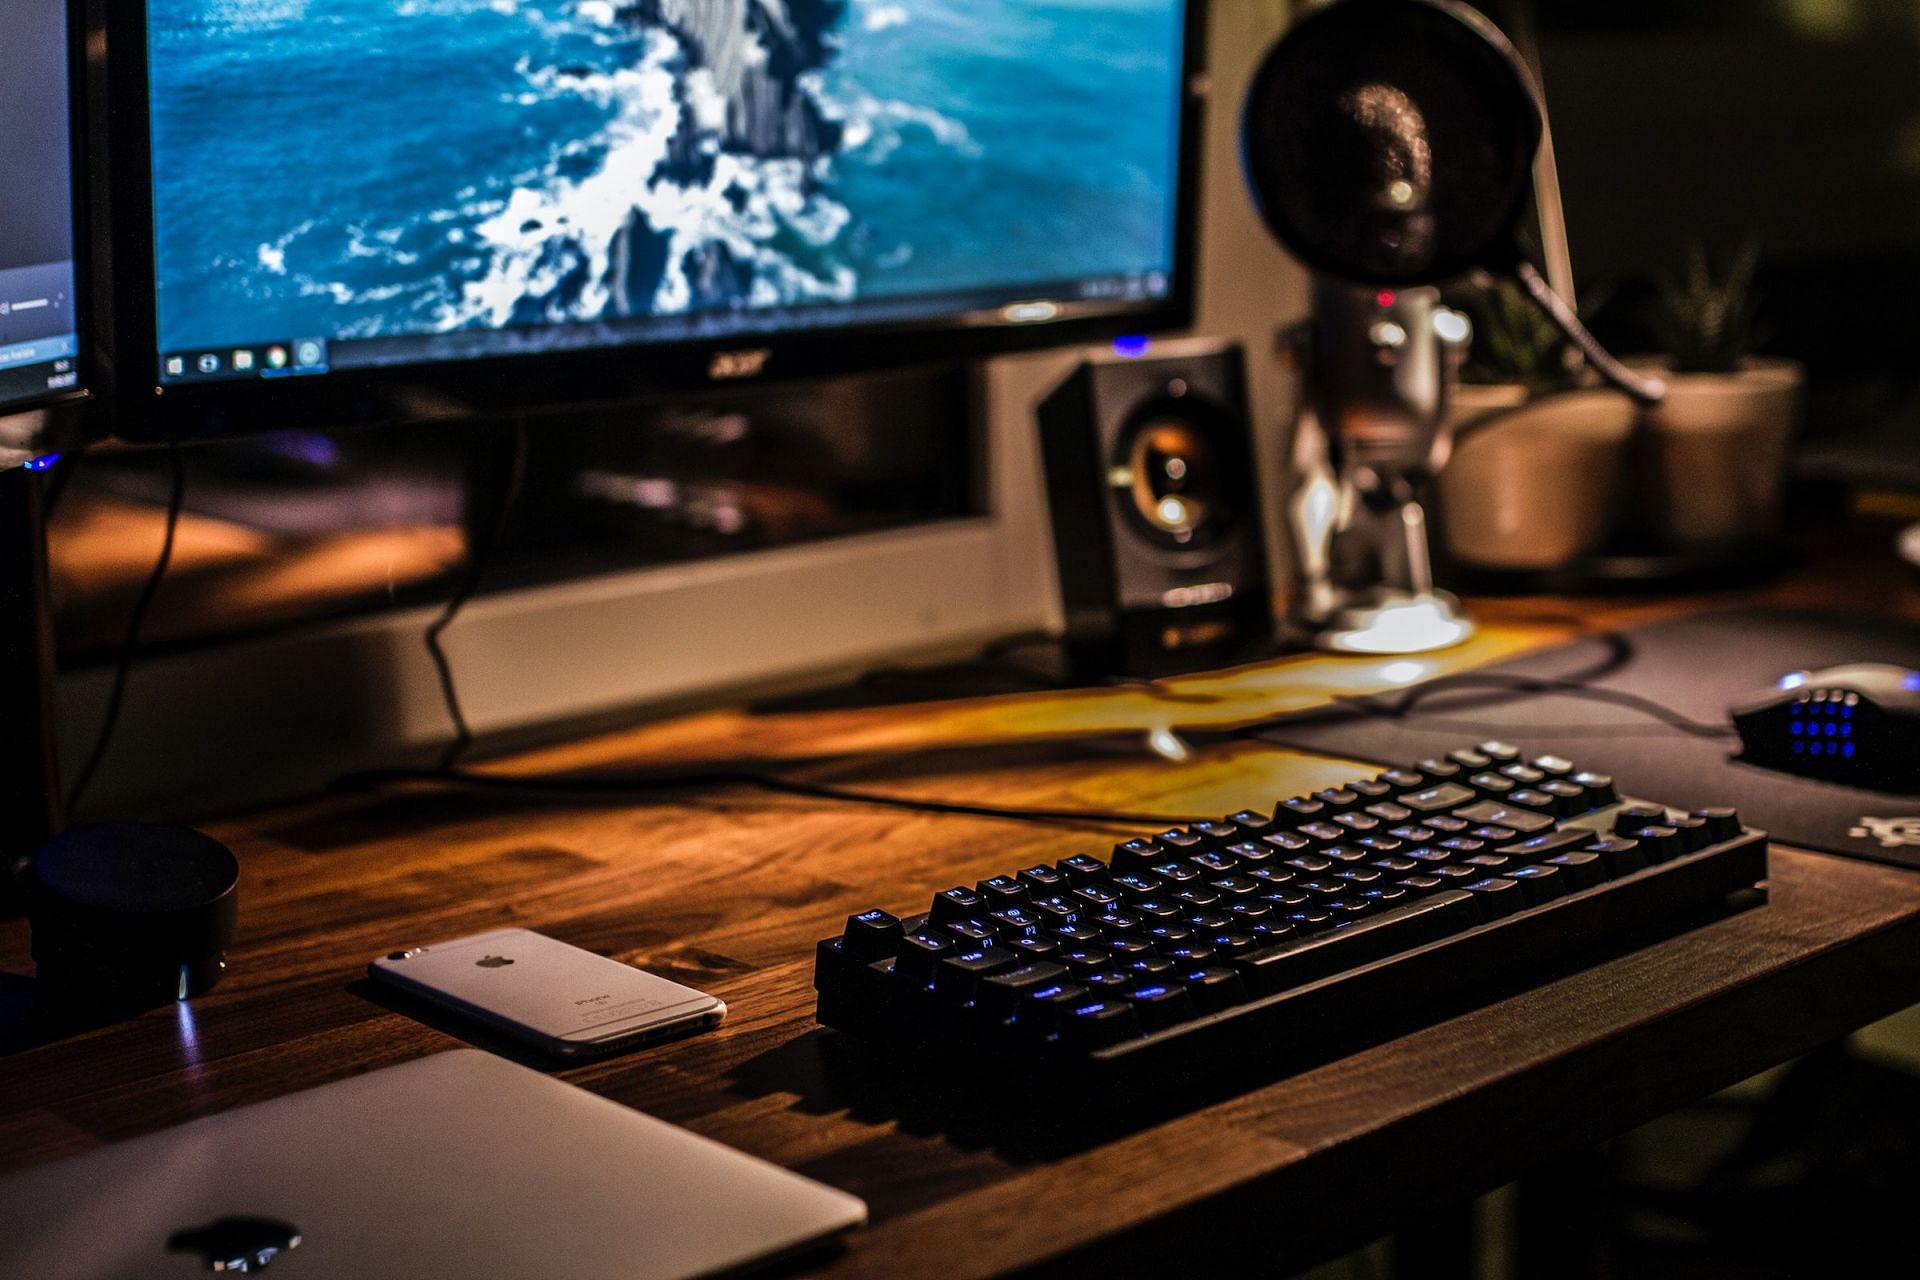 A sturdy table for PC gaming (Image via Unsplash)